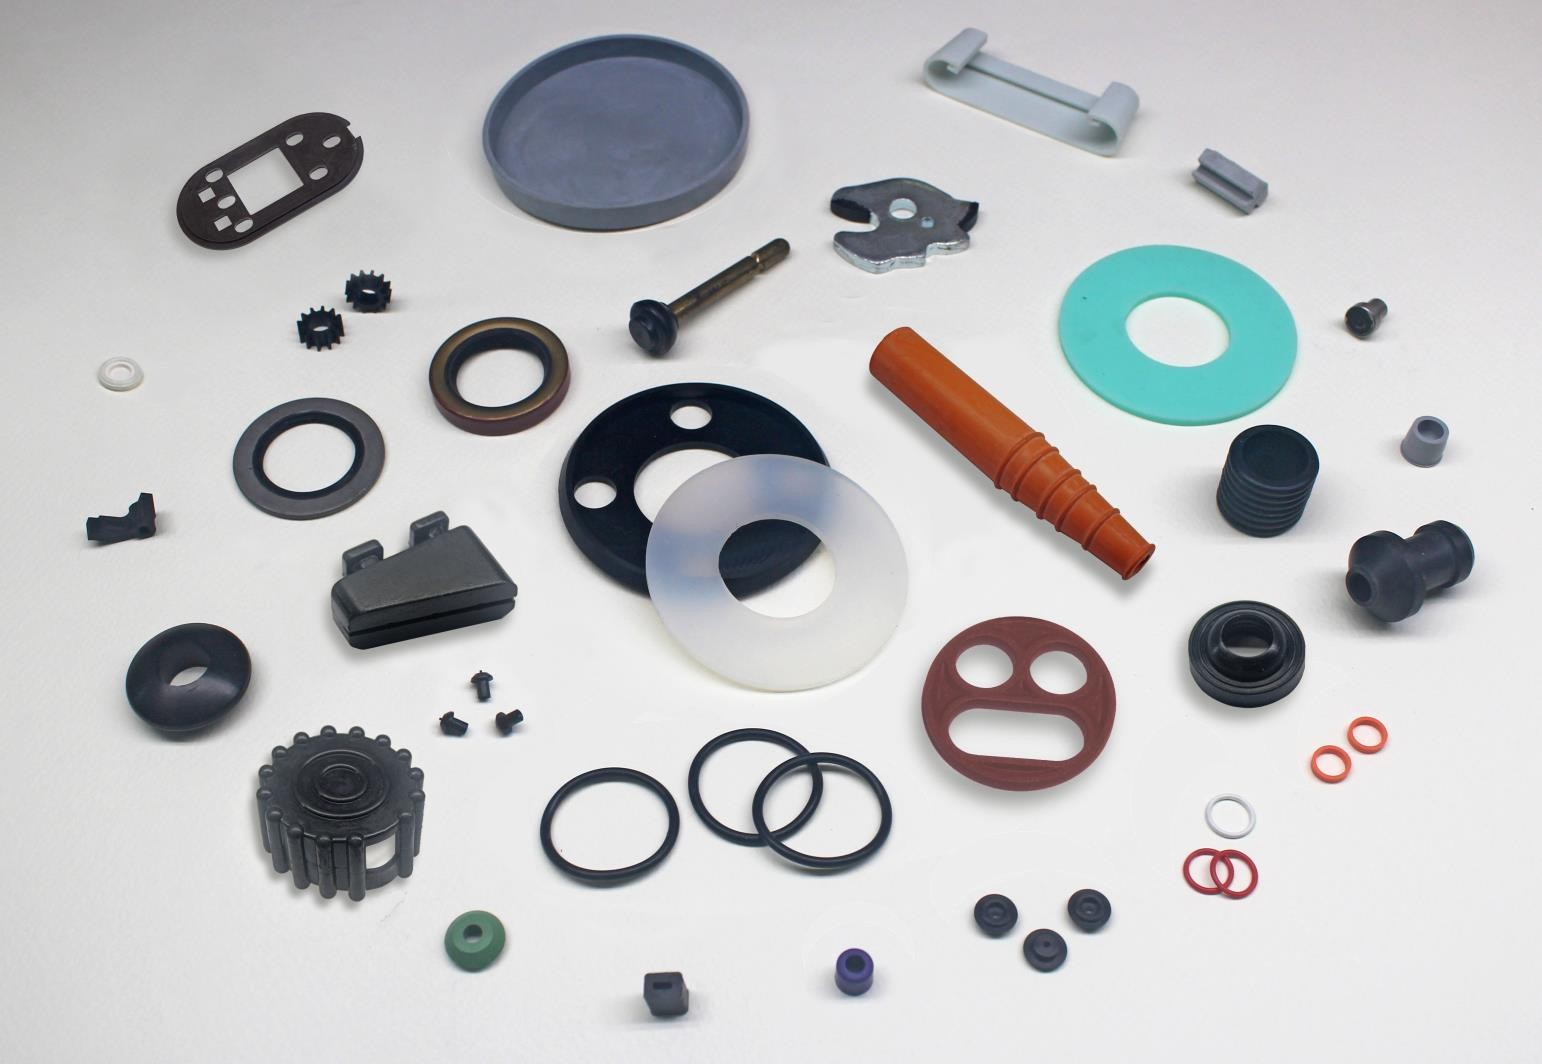 Rubber metal products